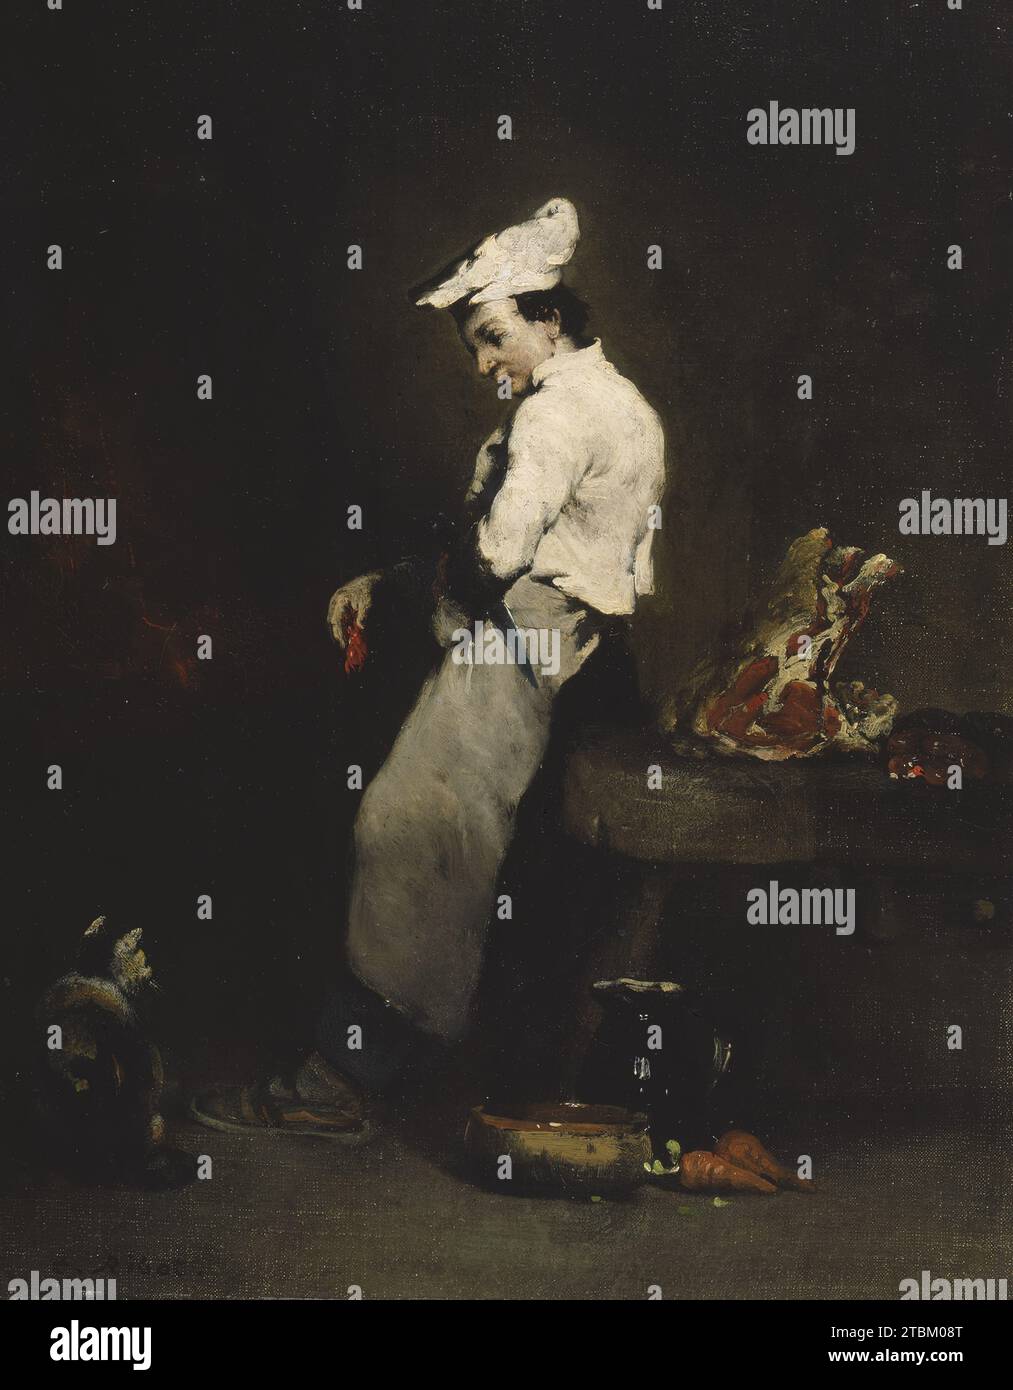 The Young Cook, 1855-1870. In this small painting, a butcher boy tempts a cat with a slice of meat. This work typifies the kitchen scenes that Ribot began to produce in the late 1850s. He often painted at night by candlelight, a fact that might have contributed to the limited range of colors and dramatic contrasts of light and shadow in his works. Like so many of his colleagues at this time, Ribot was influenced by Dutch, Spanish, and French 17th-century paintings in the Louvre Museum. Stock Photo